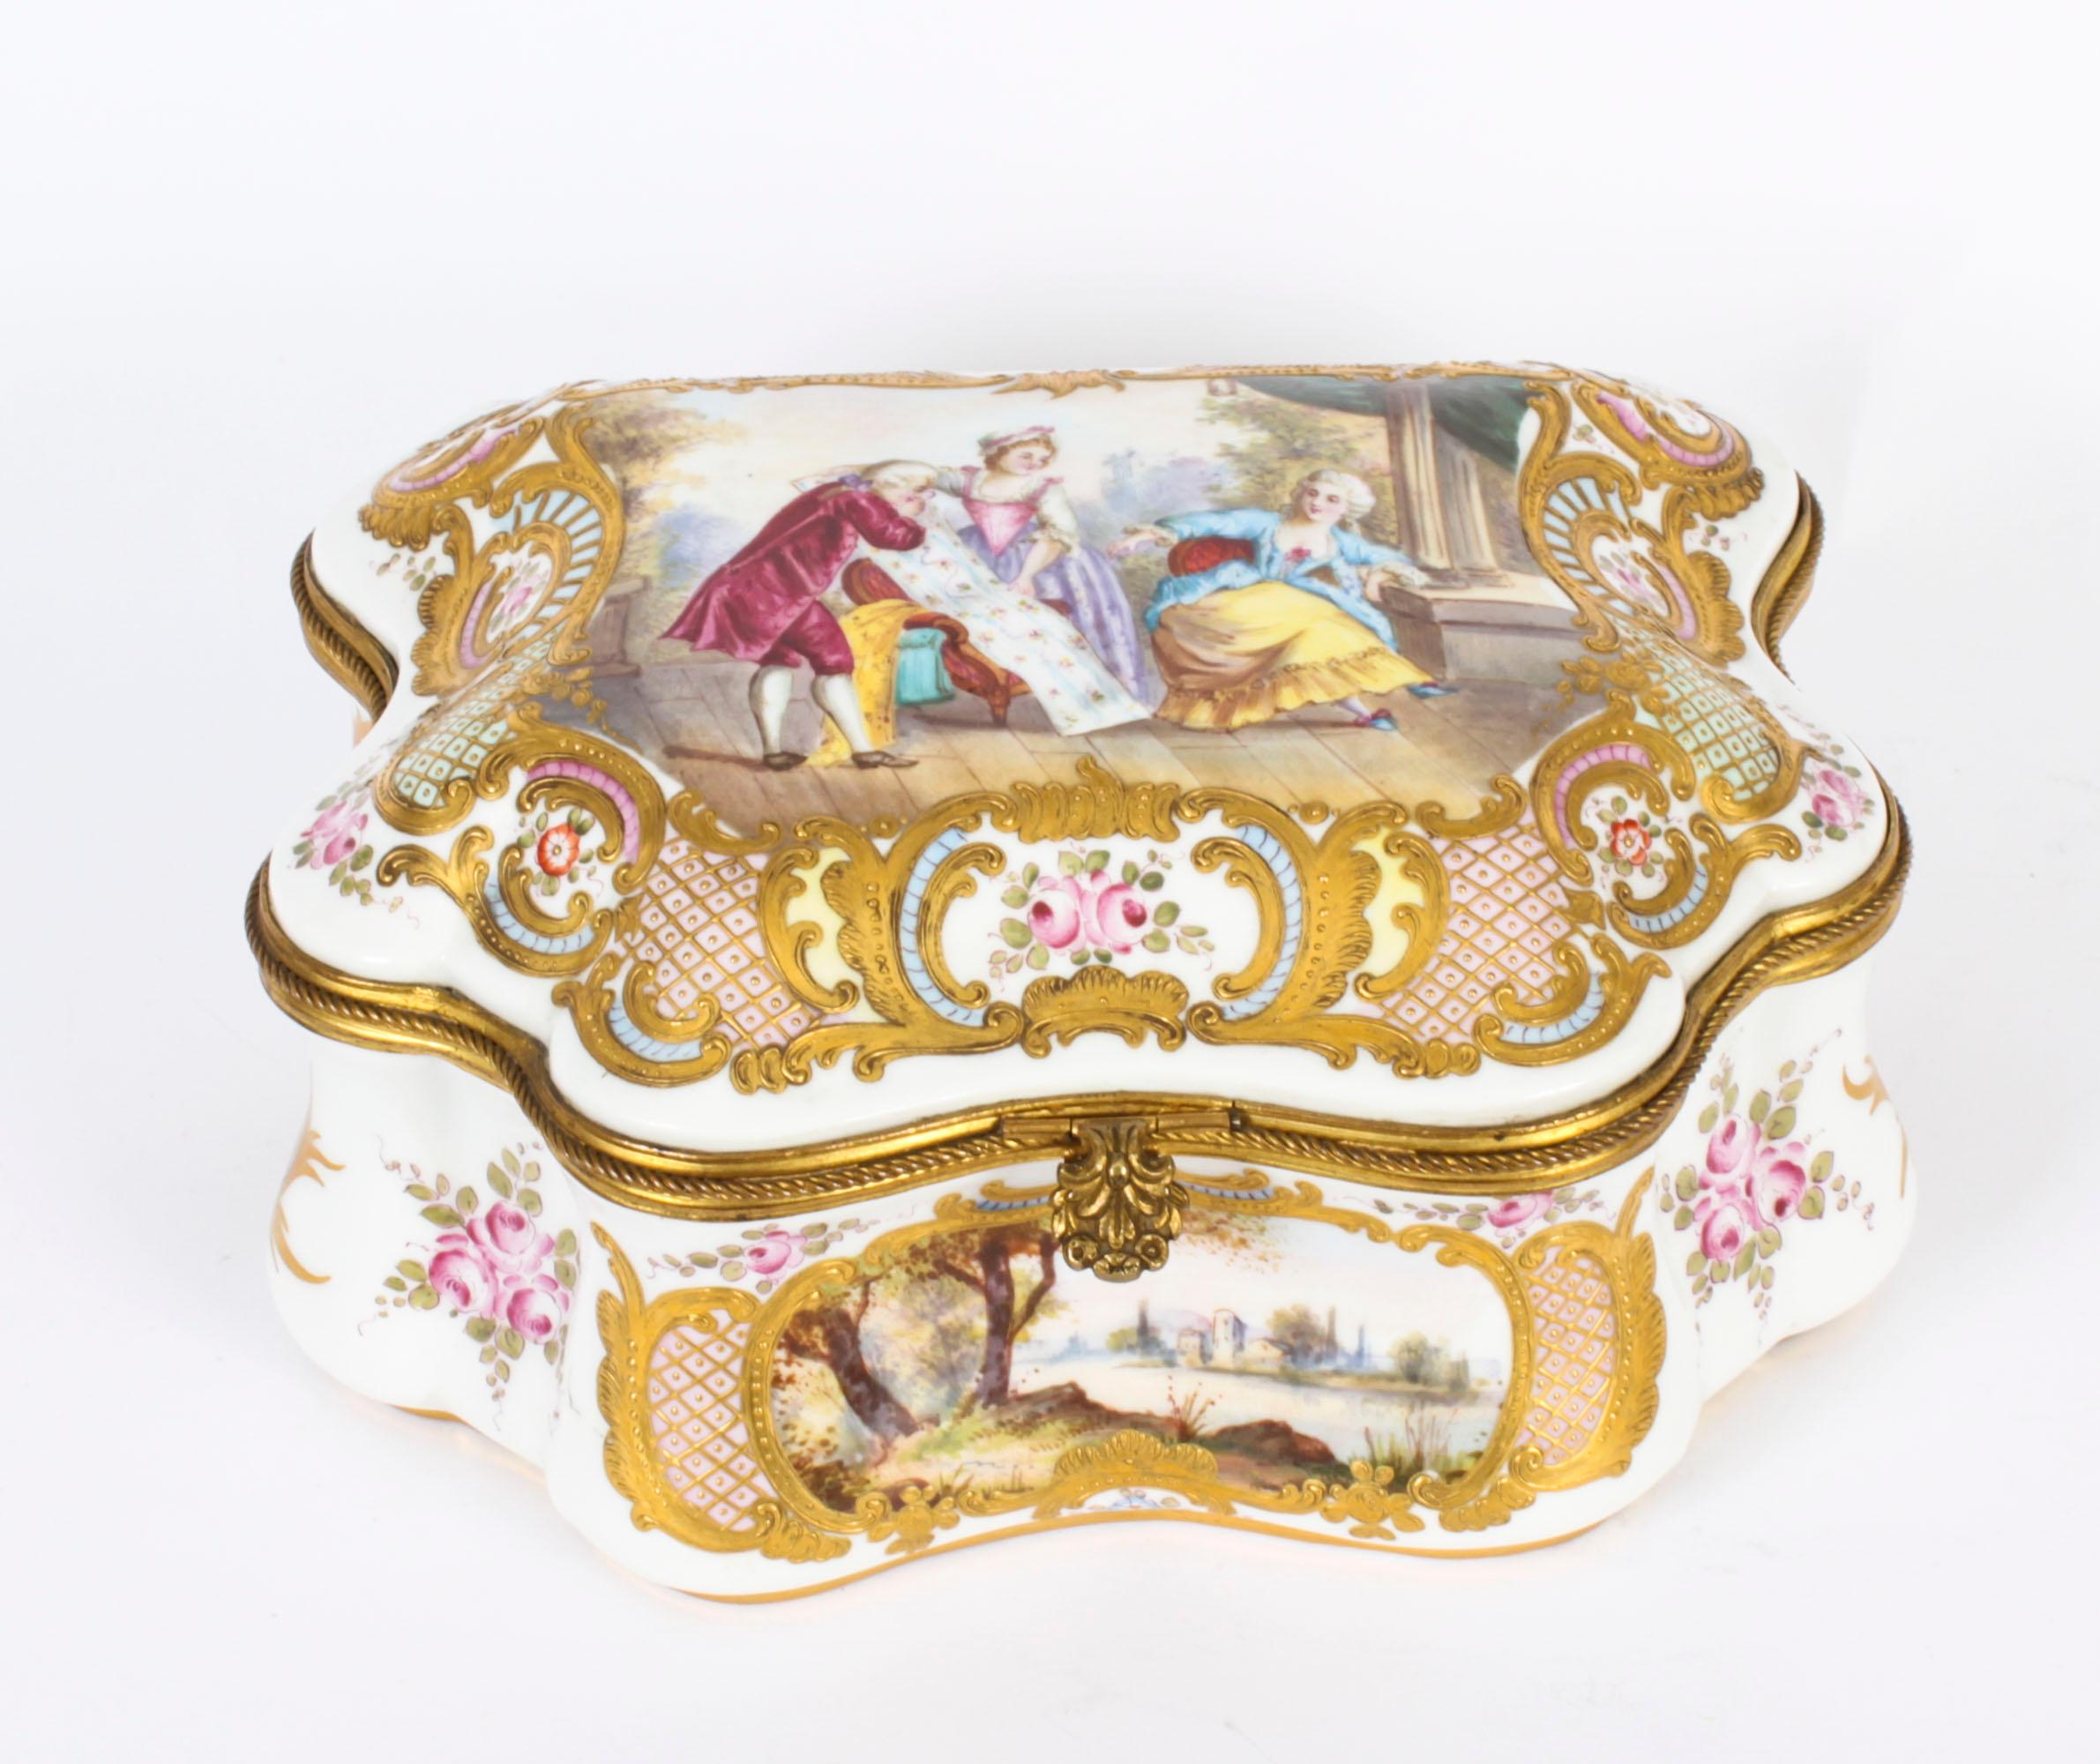 This is a fabulous, larger than usual, antique French Sevres porcelain ormolu mounted  casket, Circa 1860 in date.

The shaped hinged cover decorated with a hand painted courting couple in a richly gilded border, the front and sides decorated with